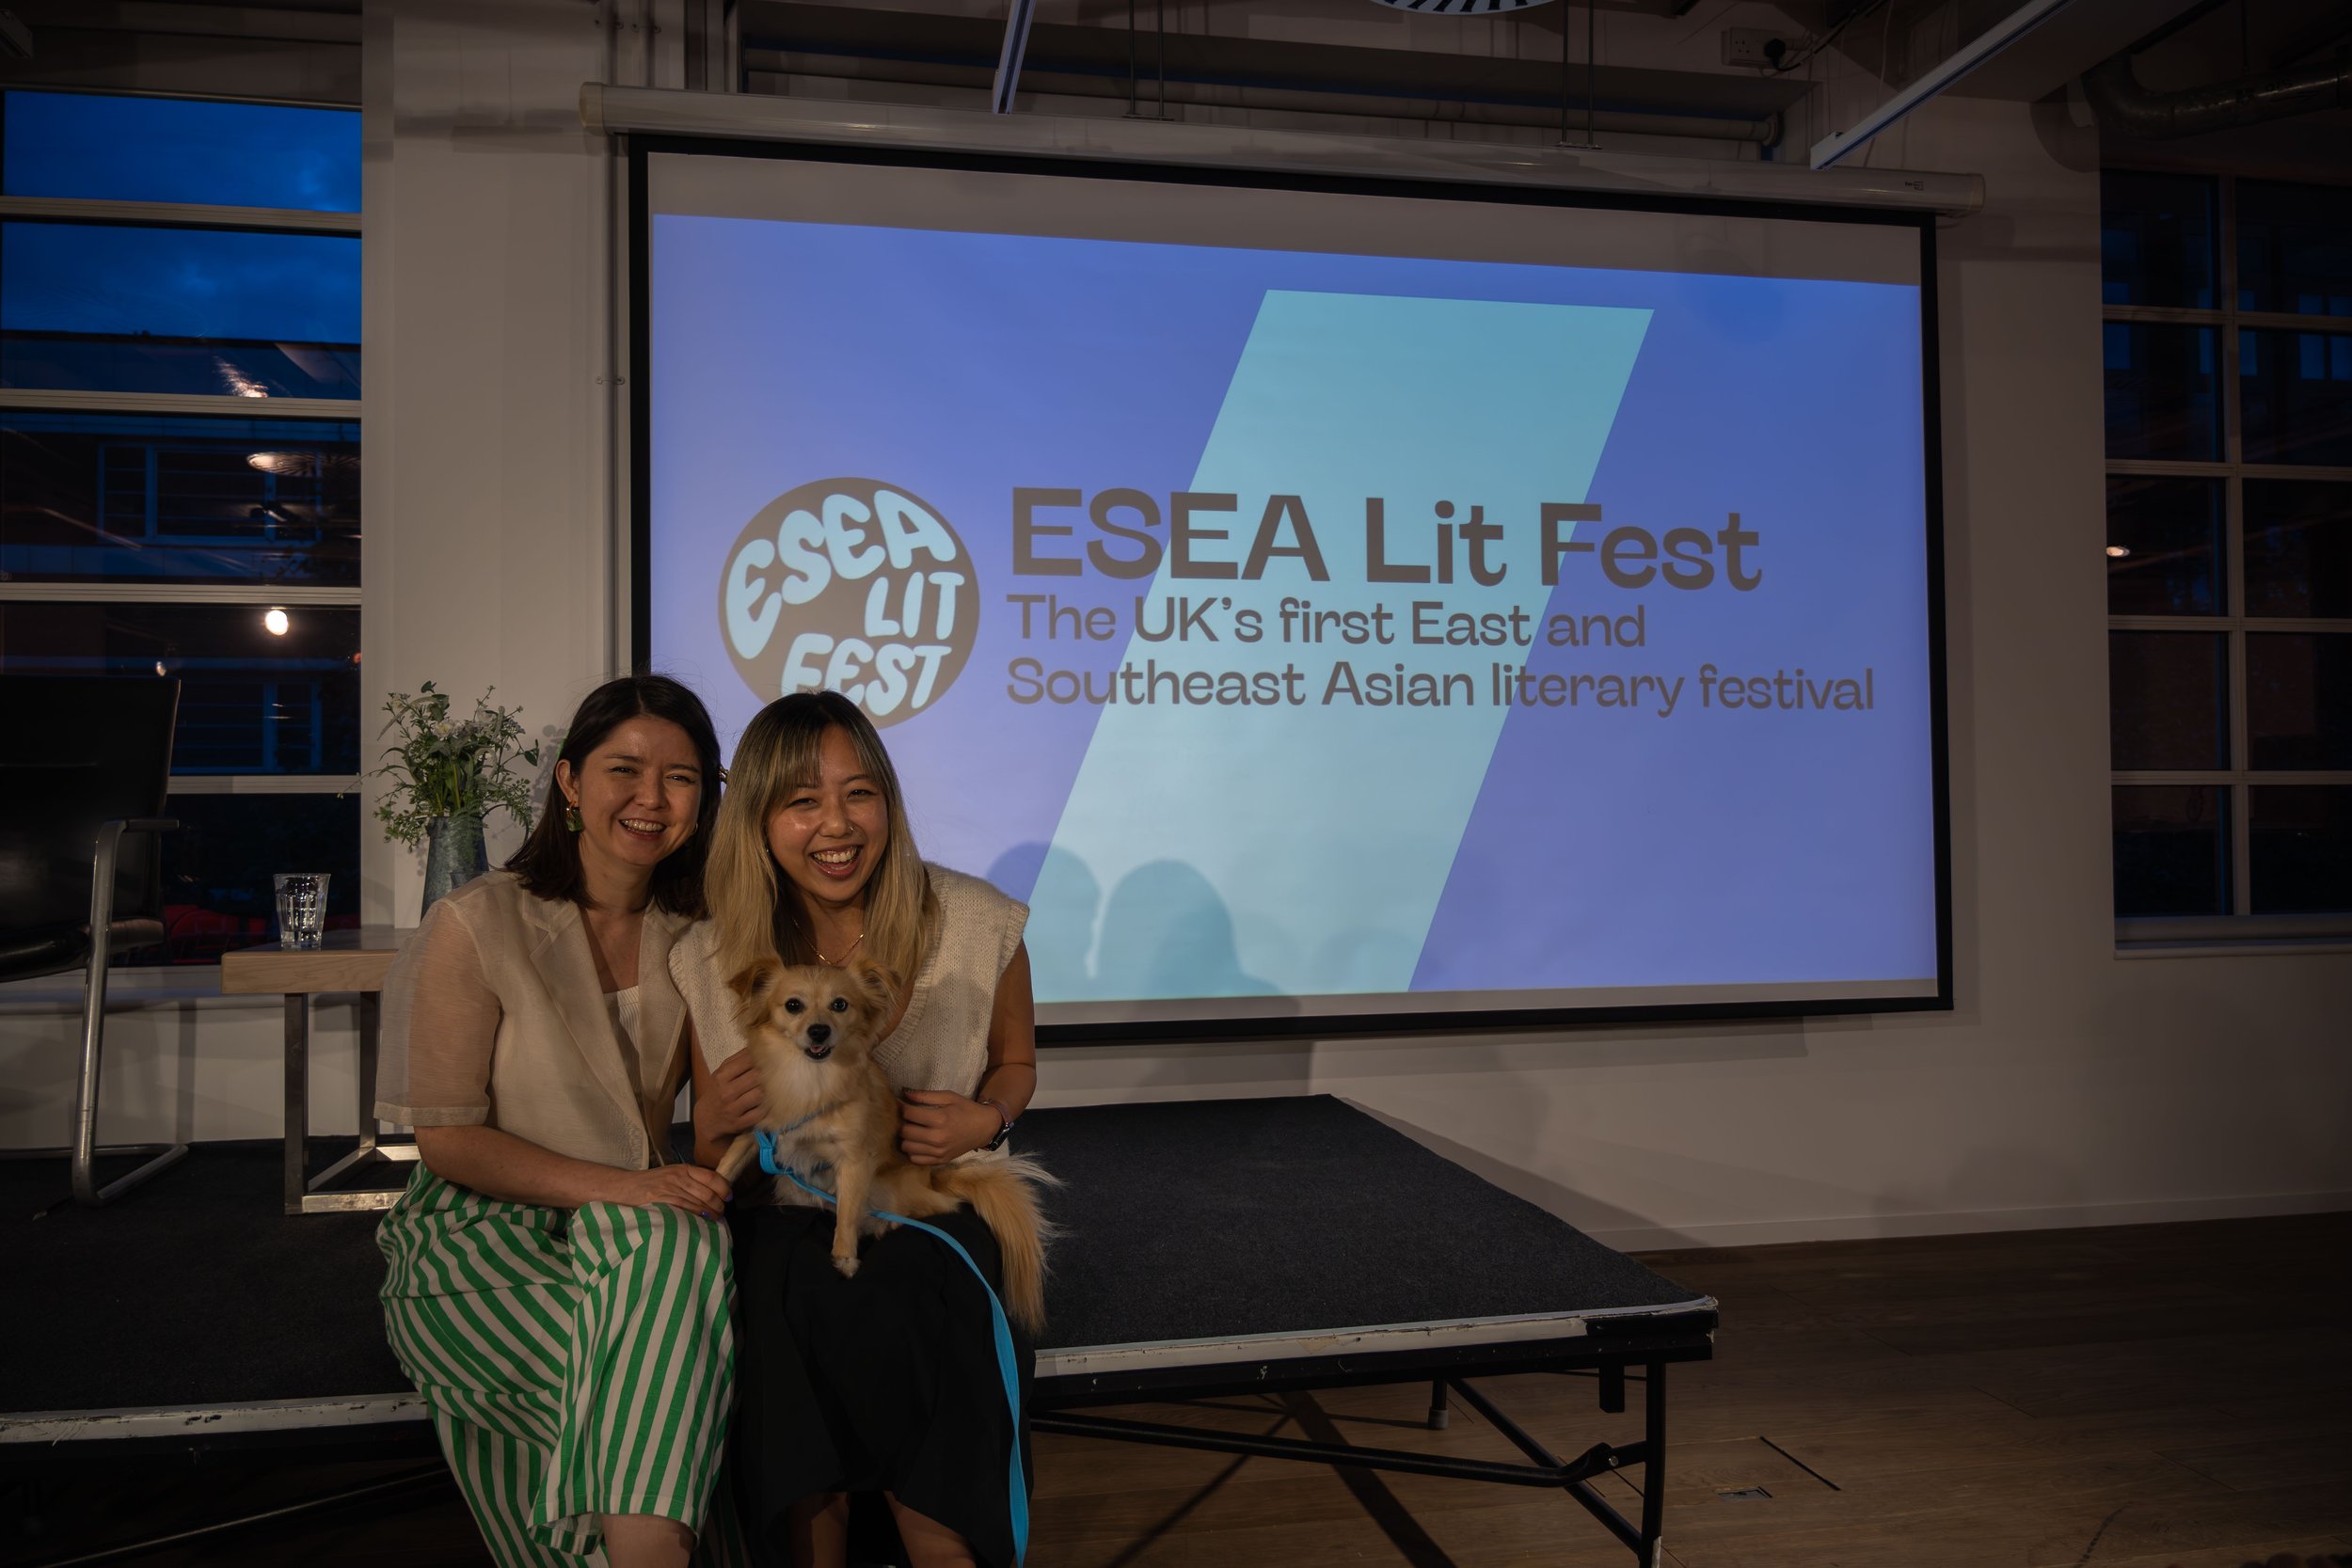 ESEA Publishing Network and ESEA Lit Fest co-founders Maria Garbutt-Lucero and Joanna Lee